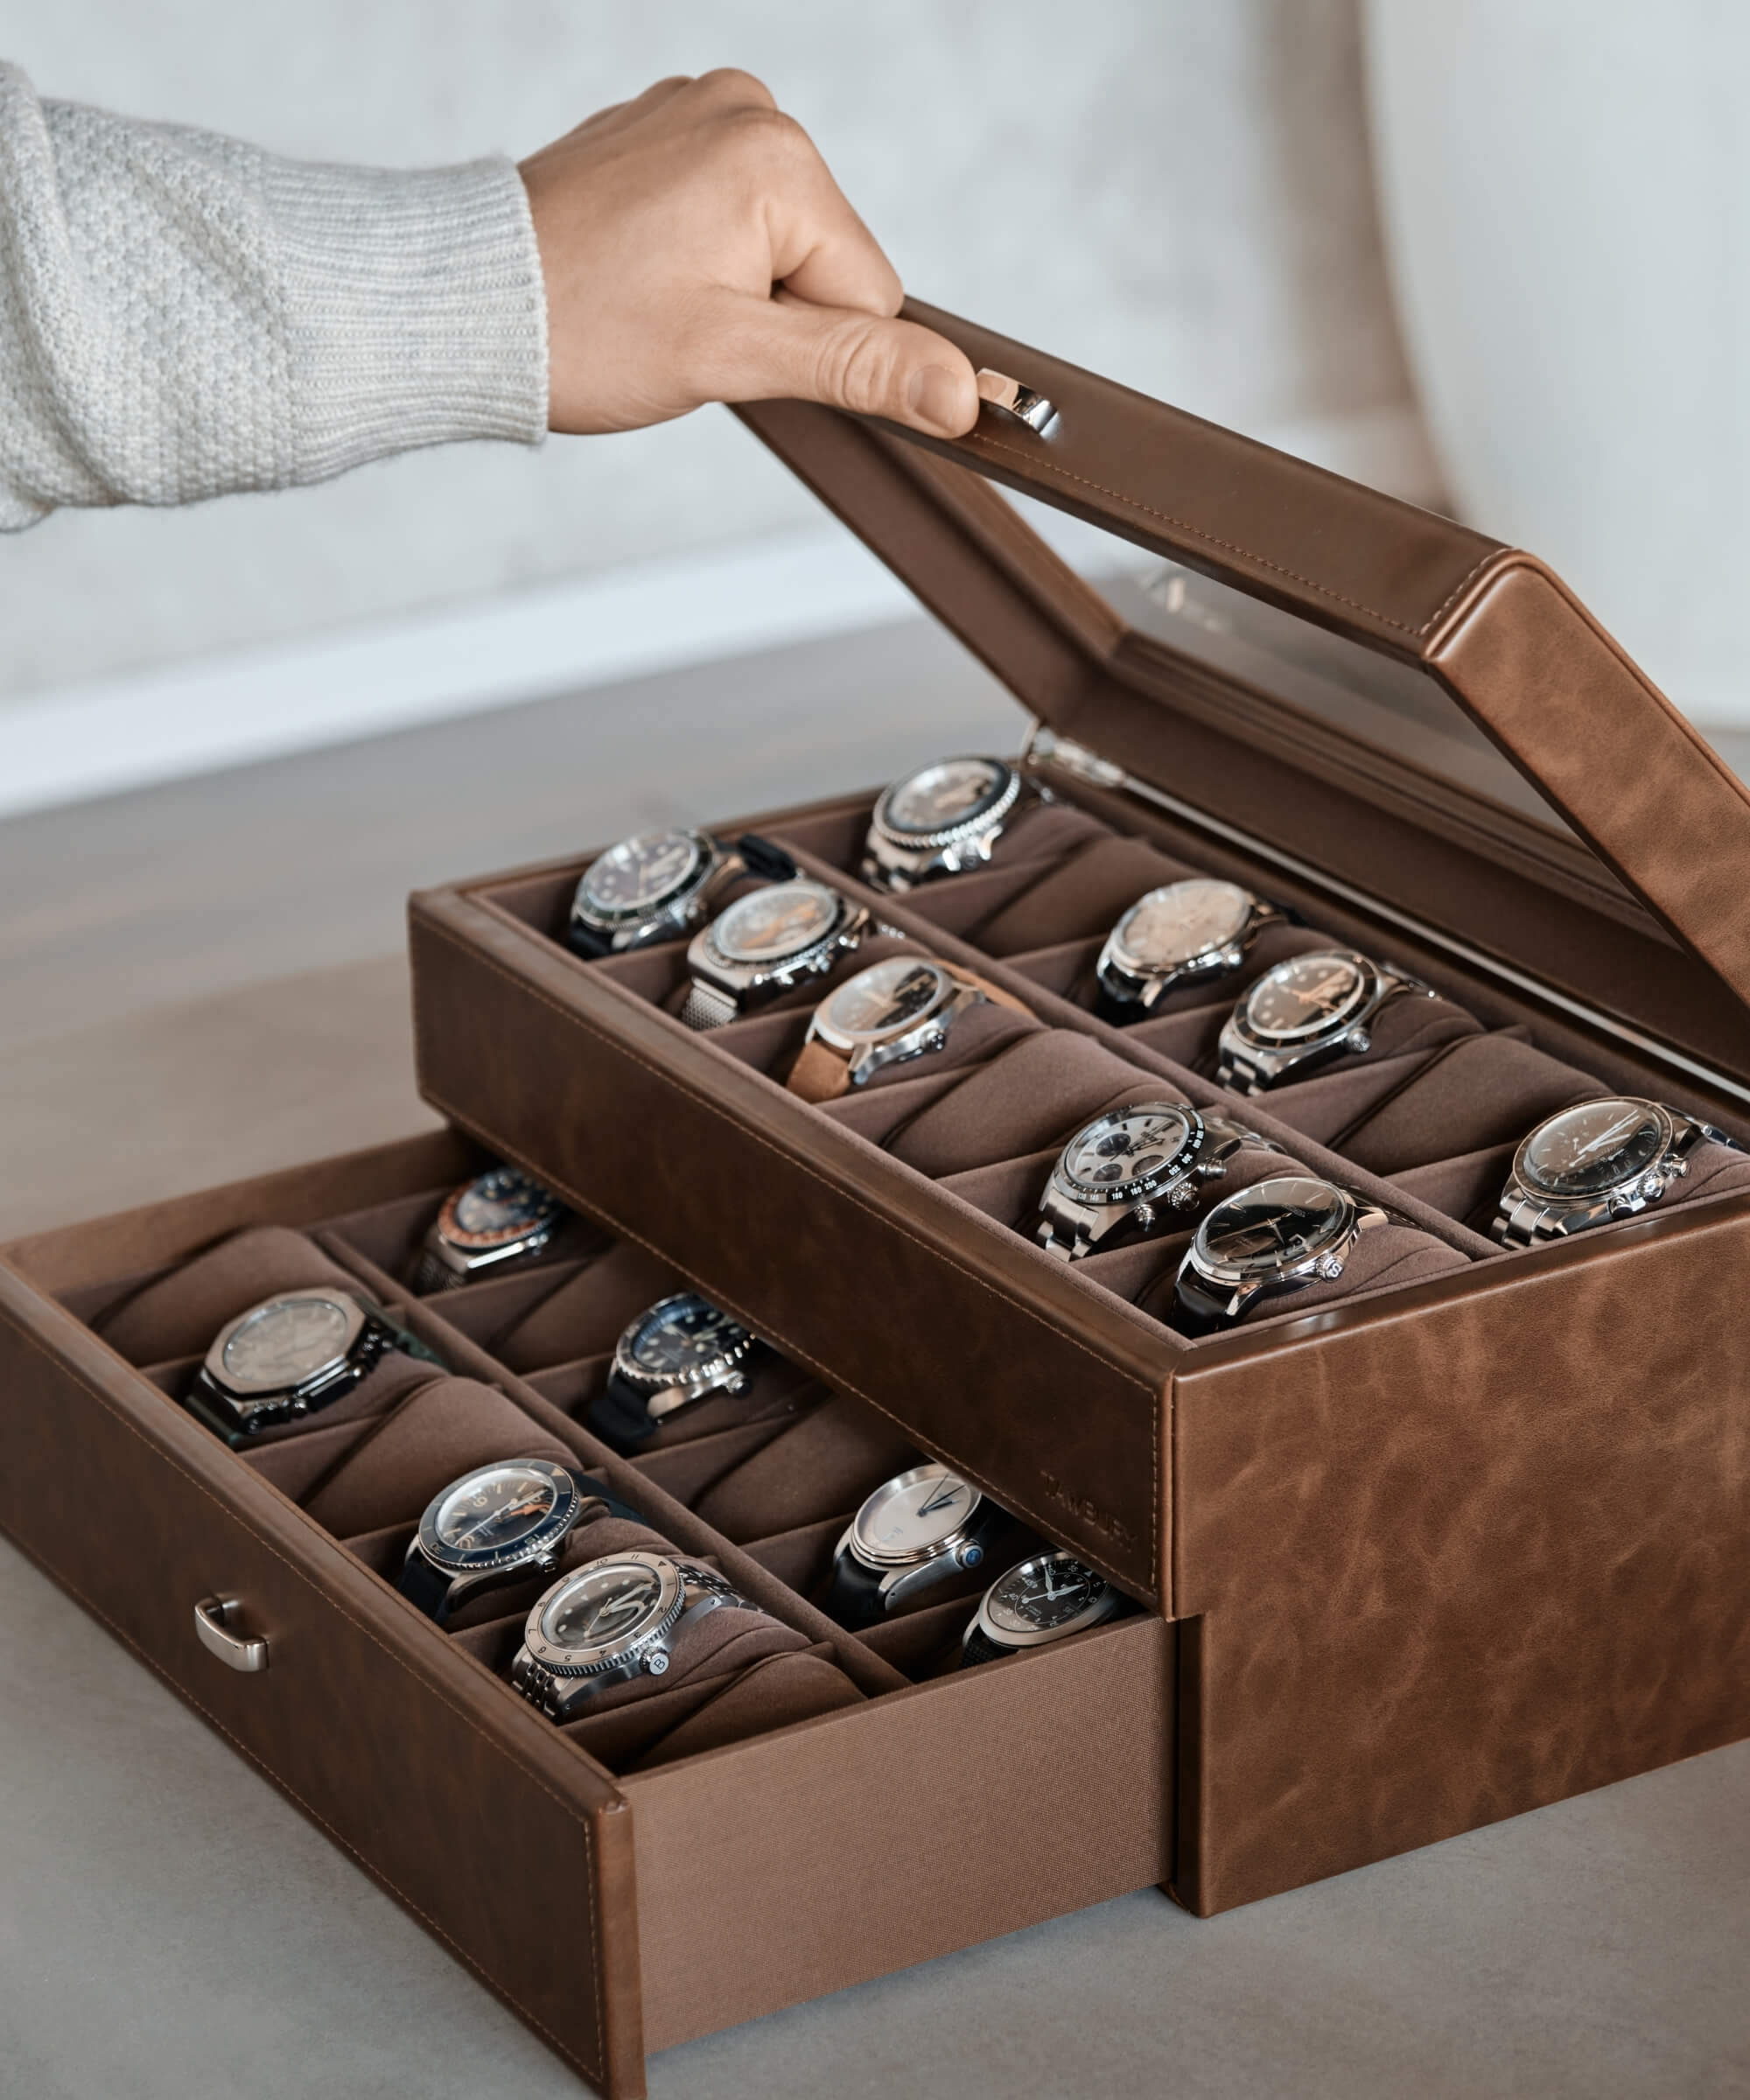 A watch enthusiast is opening a TAWBURY Bayswater 24 Slot Watch Box with Drawer - Brown full of timepieces.